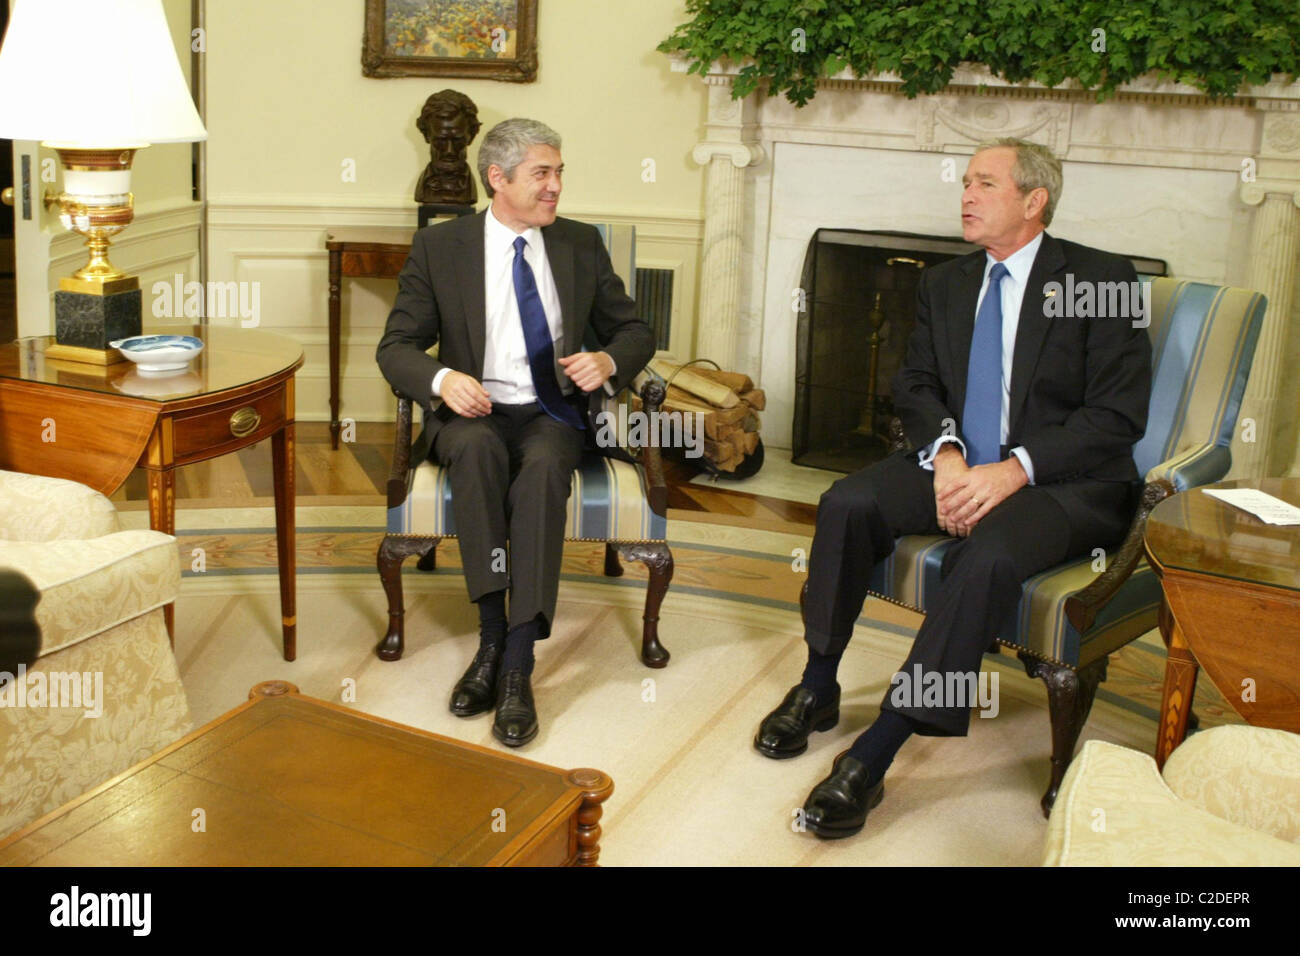 US President George W Bush welcomes Portugal Prime Minister Jose Socrates at the White House Oval Office Washington DC, USA - Stock Photo